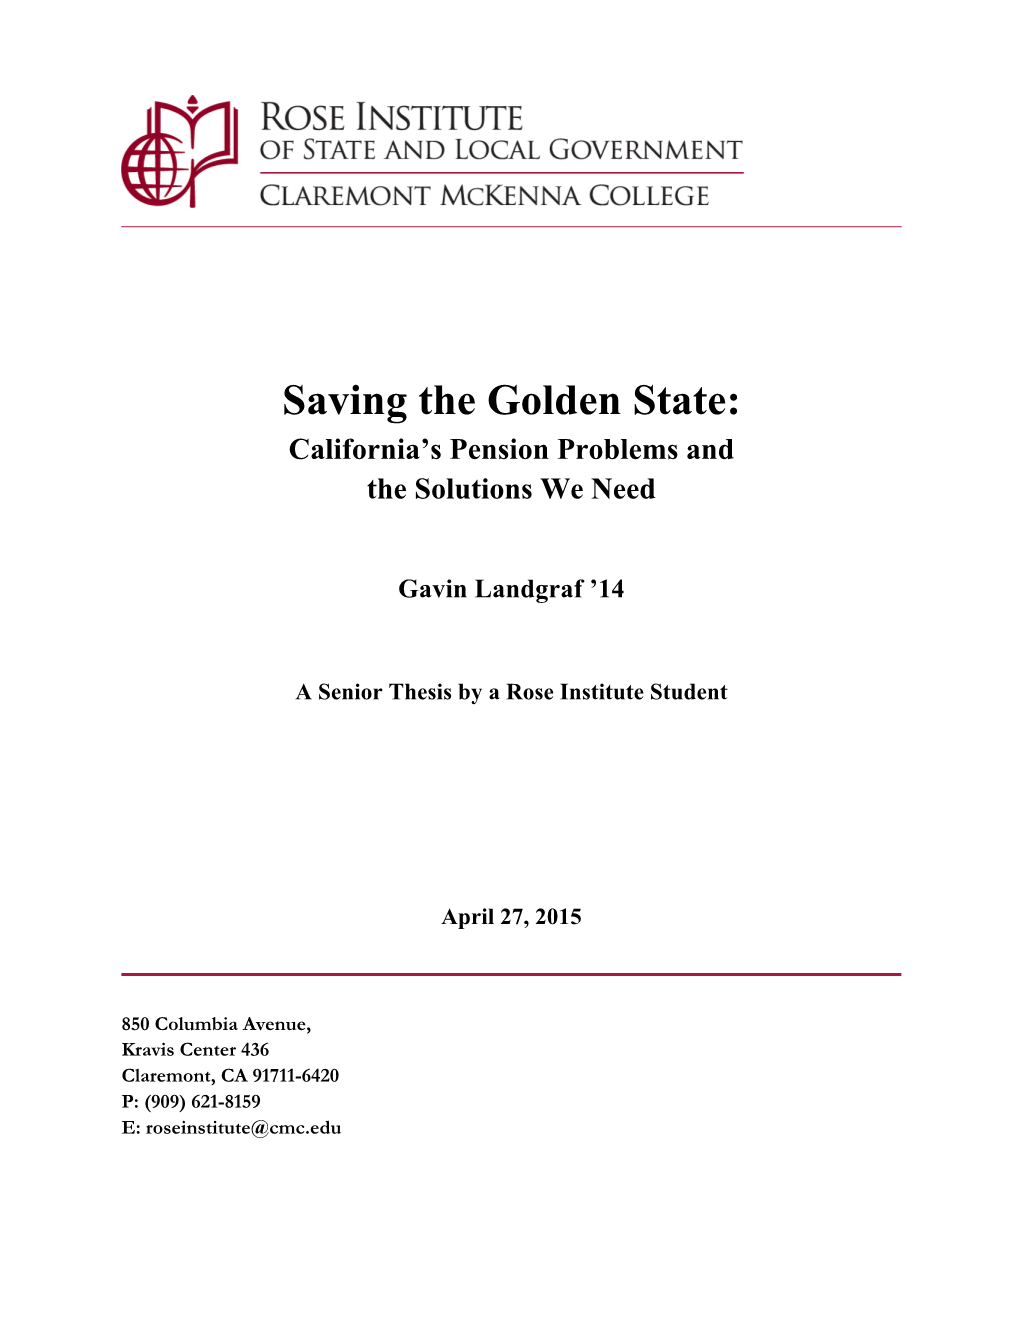 Saving the Golden State: California's Pension Problems and The